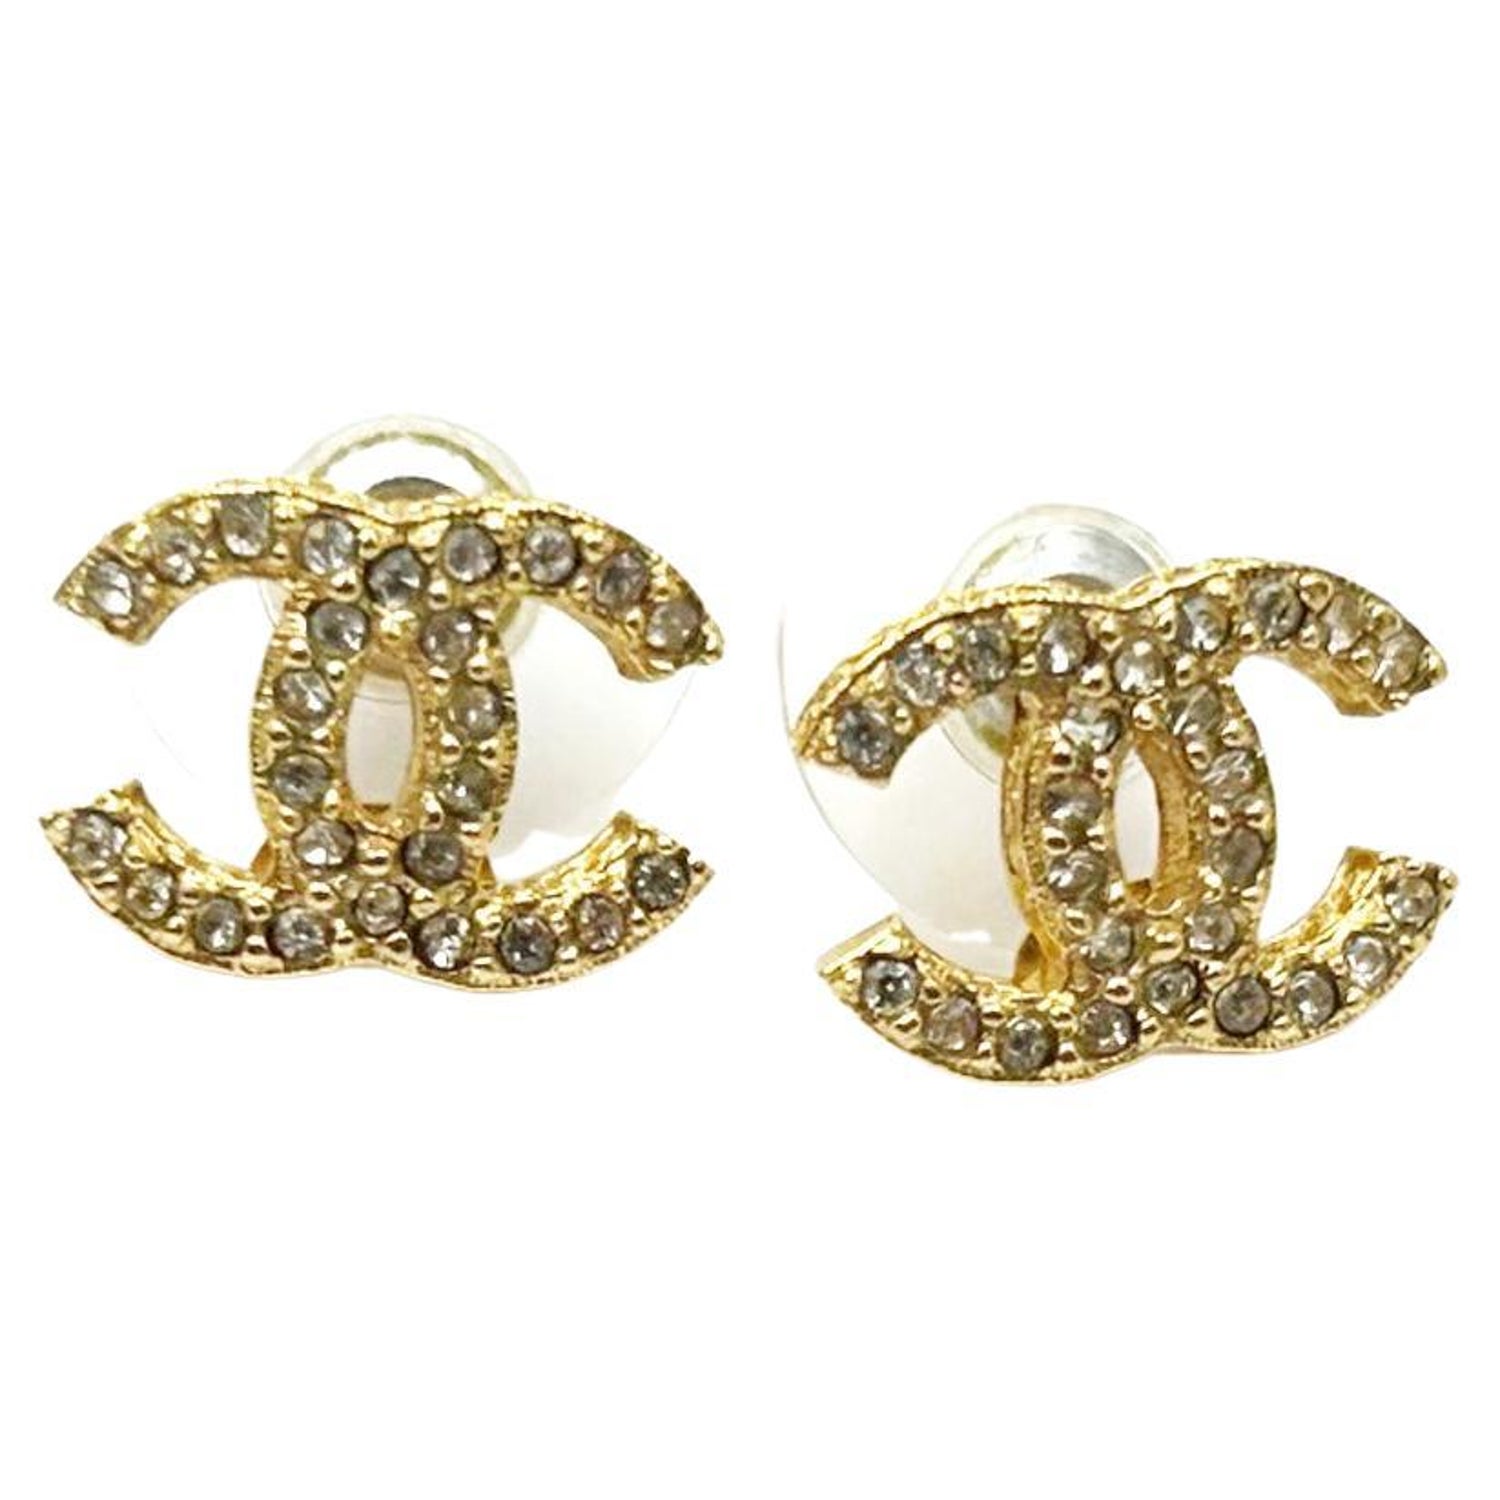 AUTHENTIC CHANEL LARGE CRYSTAL CC STRASS RHINESTONE EARRINGS CLIP ON SILVER  MINT